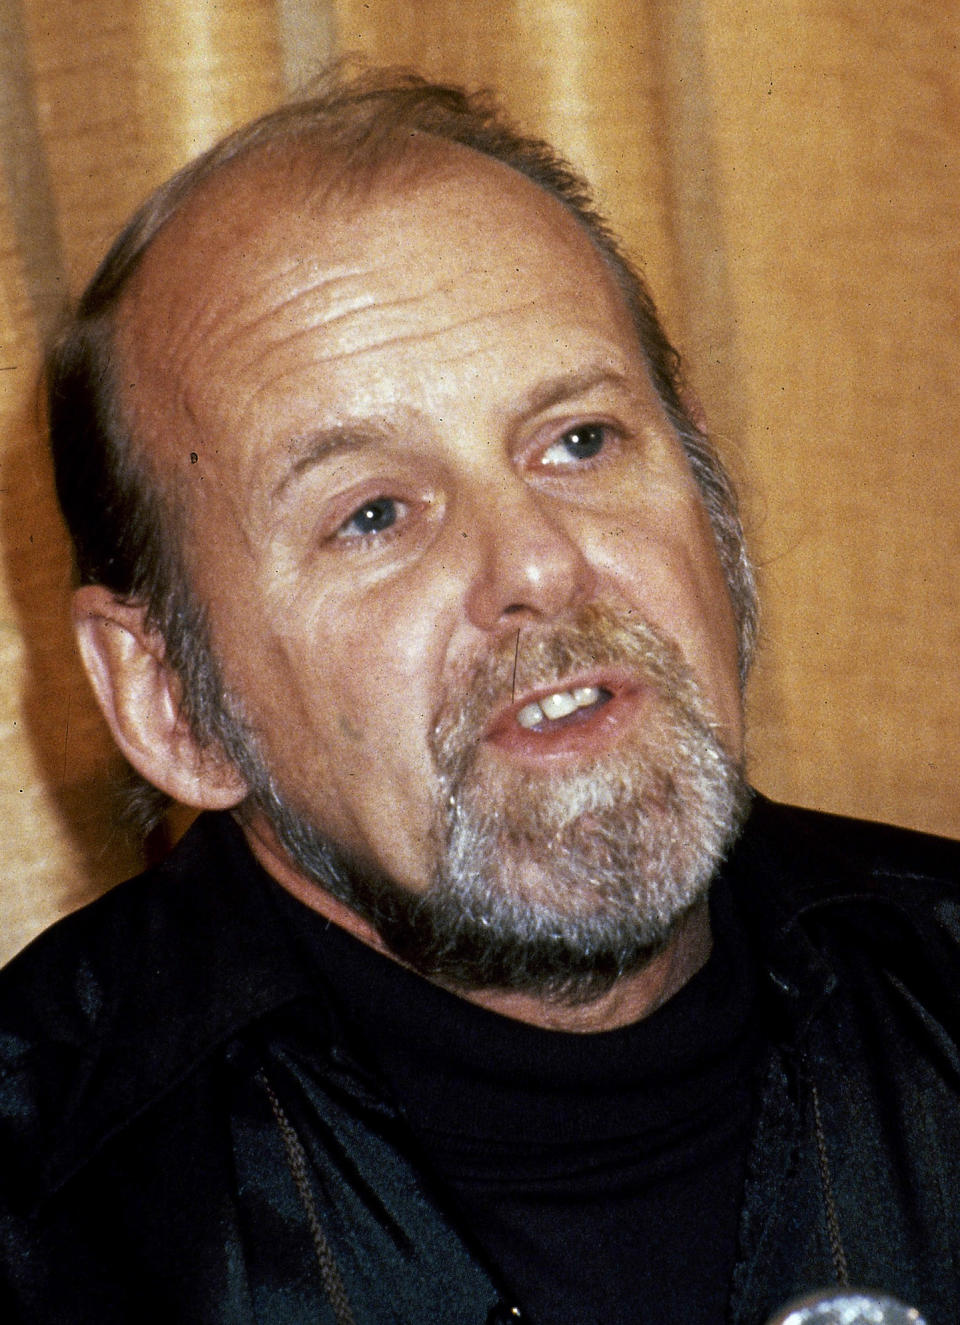 FILE - In this 1980 file photo, director/choreographer Bob Fosse appears during a news conference at the Cannes Film Festival, at Cannes, France. Fosse’s all-singing, all-dancing 1978 revue “Dancin’” is heading back to Broadway. Performances begin March 2, 2023, at the Music Box Theatre, with an opening night set for March 19. (AP Photo/Jean-Jacques Levy, File)